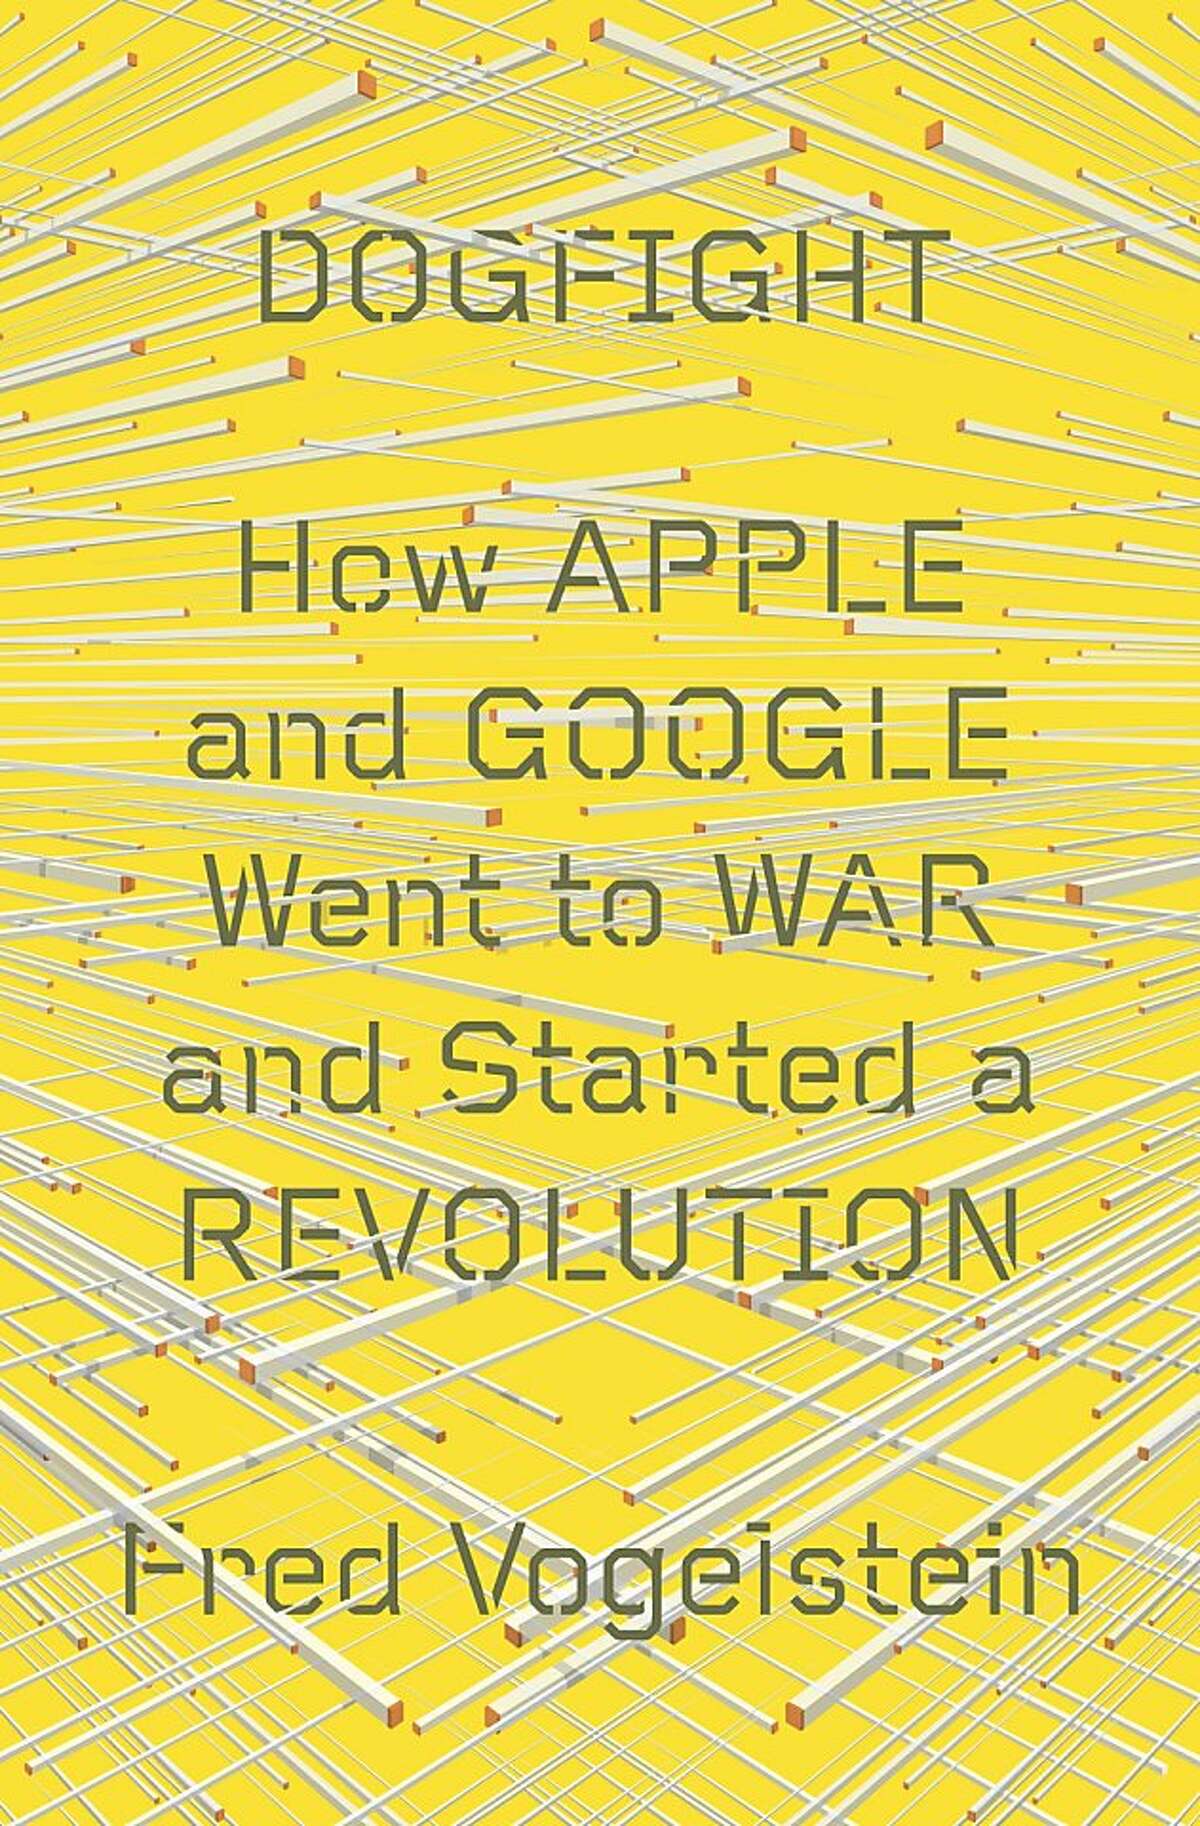 Dogfight: How Apple and Google Went to War and Started a Revolution, by Fred Vogelstein